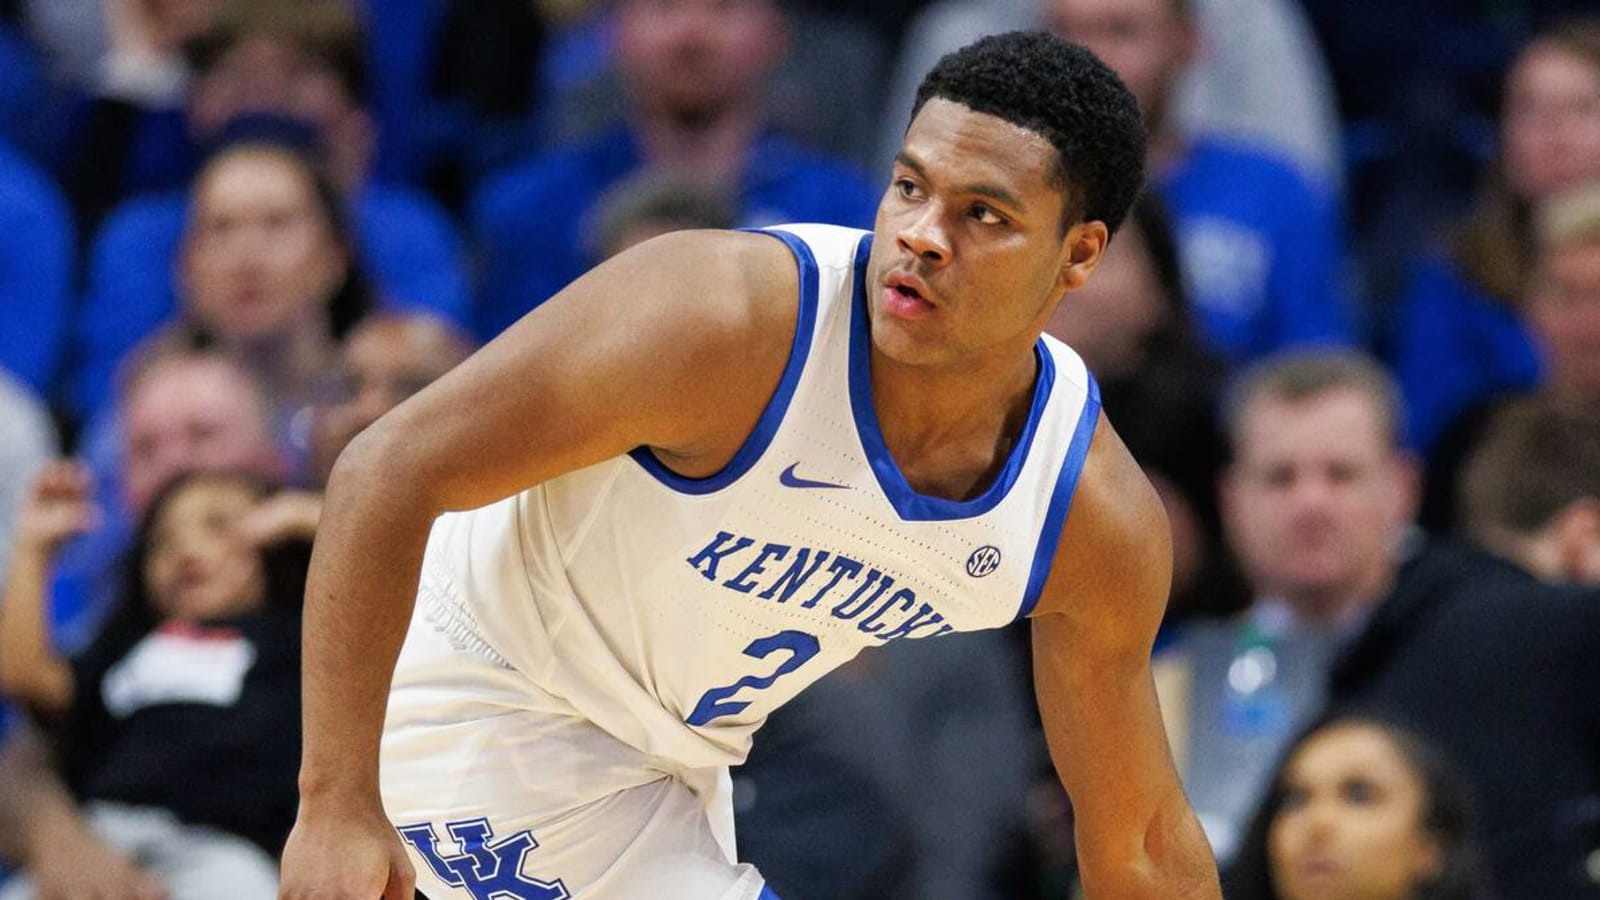 Transfer portal got a massive addition in experienced Kentucky point guard